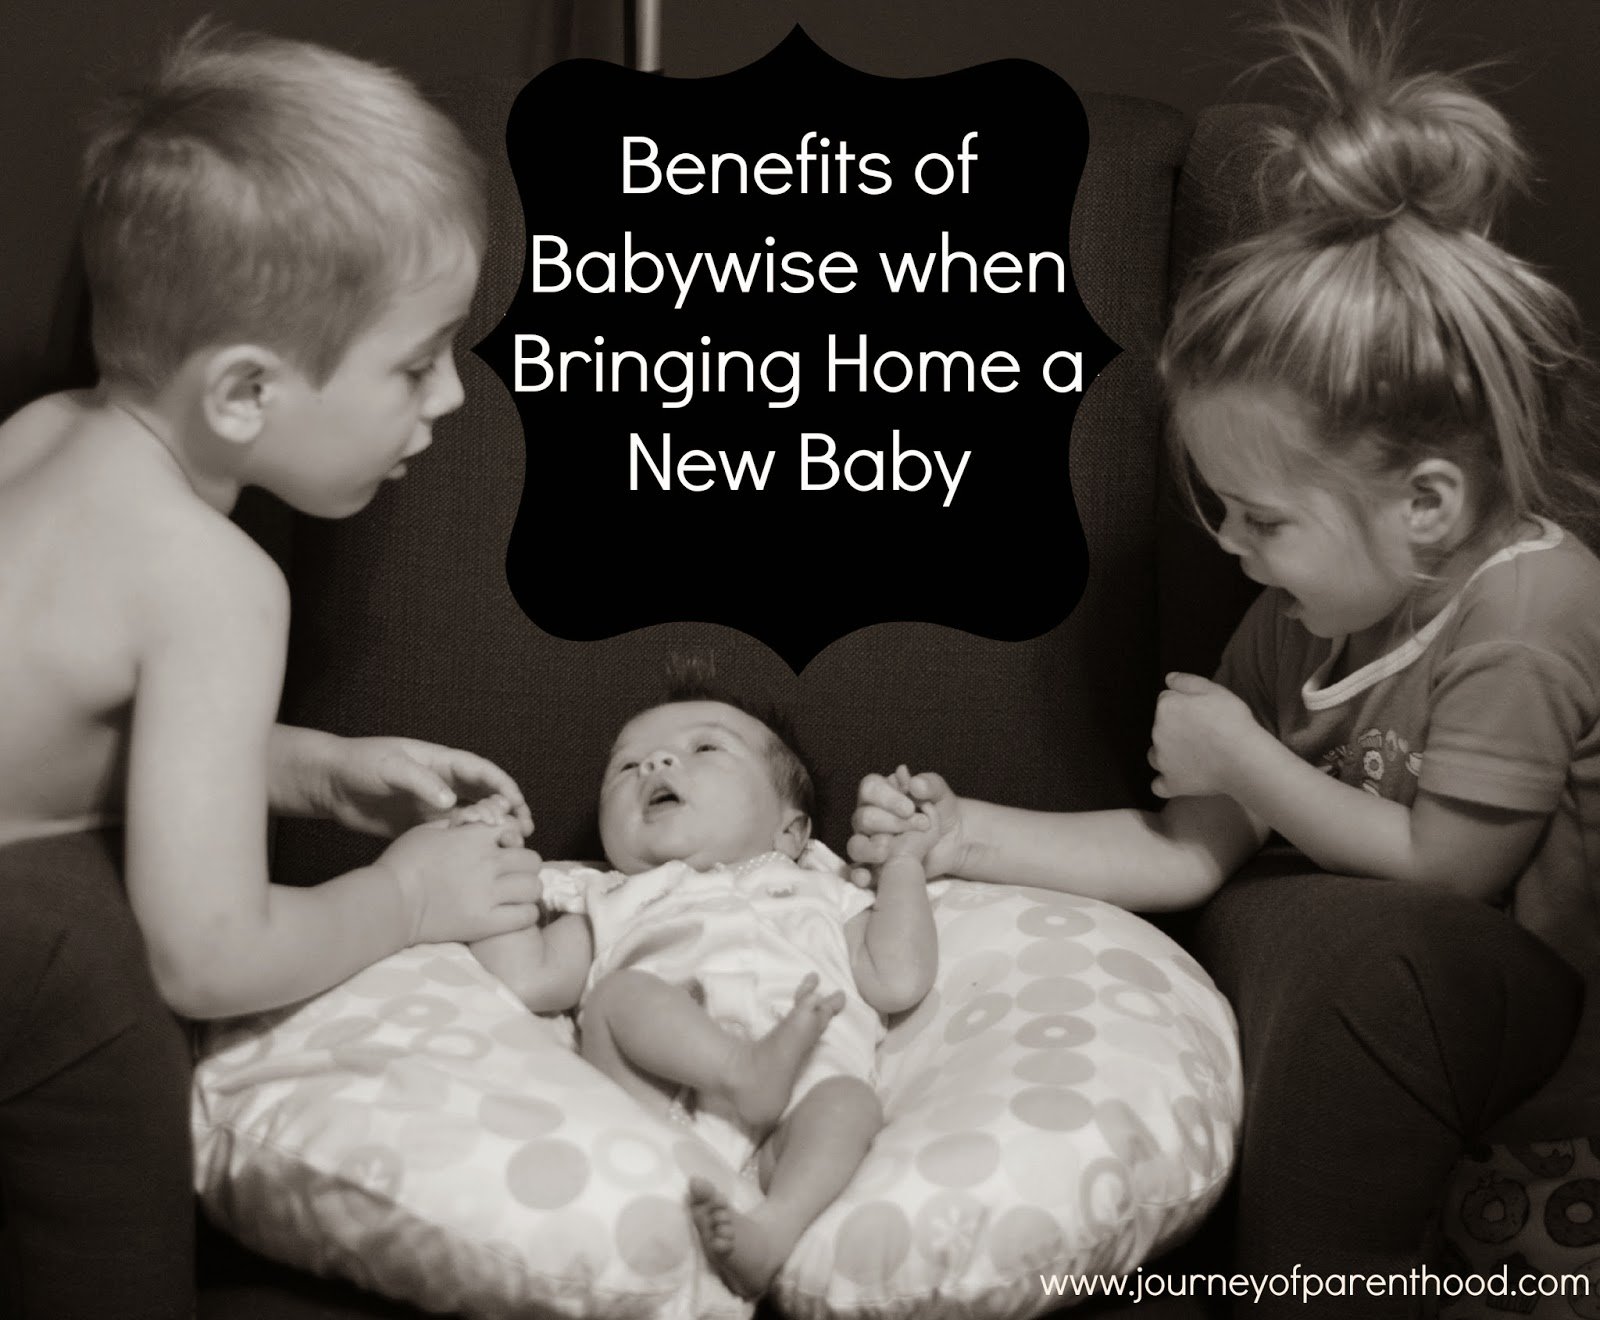 Babywise With a New Baby: Benefits When Bringing Home a Newborn